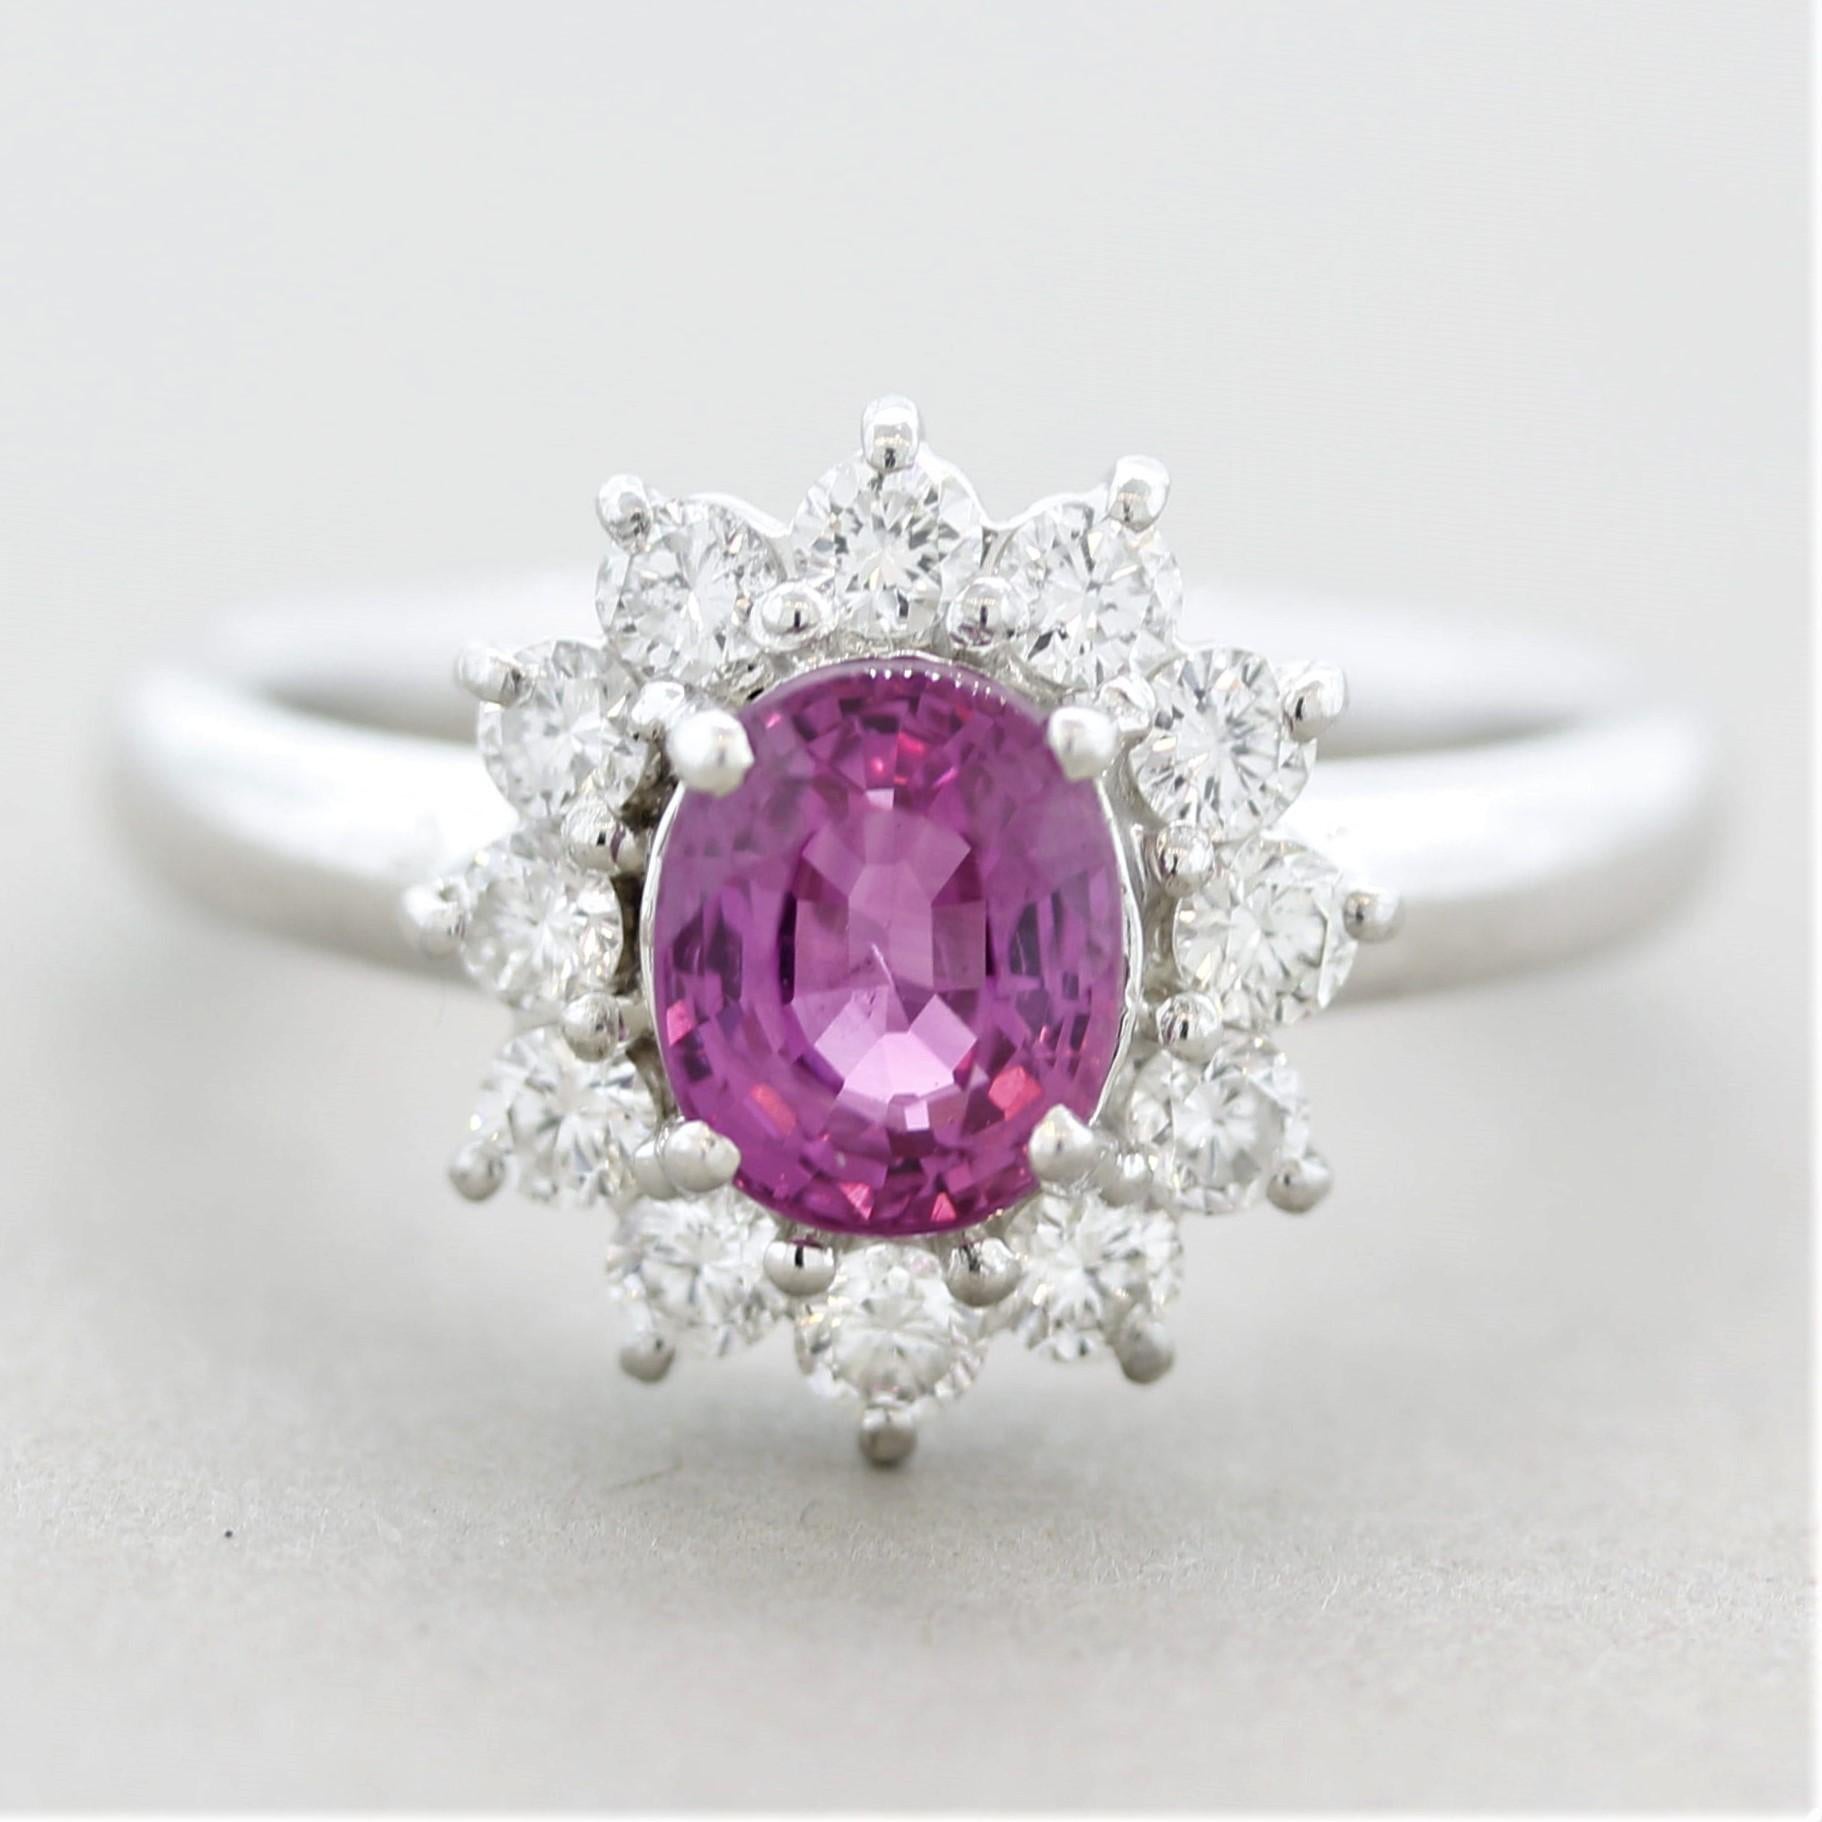 A smaller yet extremely fine fancy pink sapphire! It weighs 1.53 carats and has an amazing vivid intense pink color with hints of purple adding to the saturation. It has an excellent oval shape and free of any inclusions allowing light to enter and